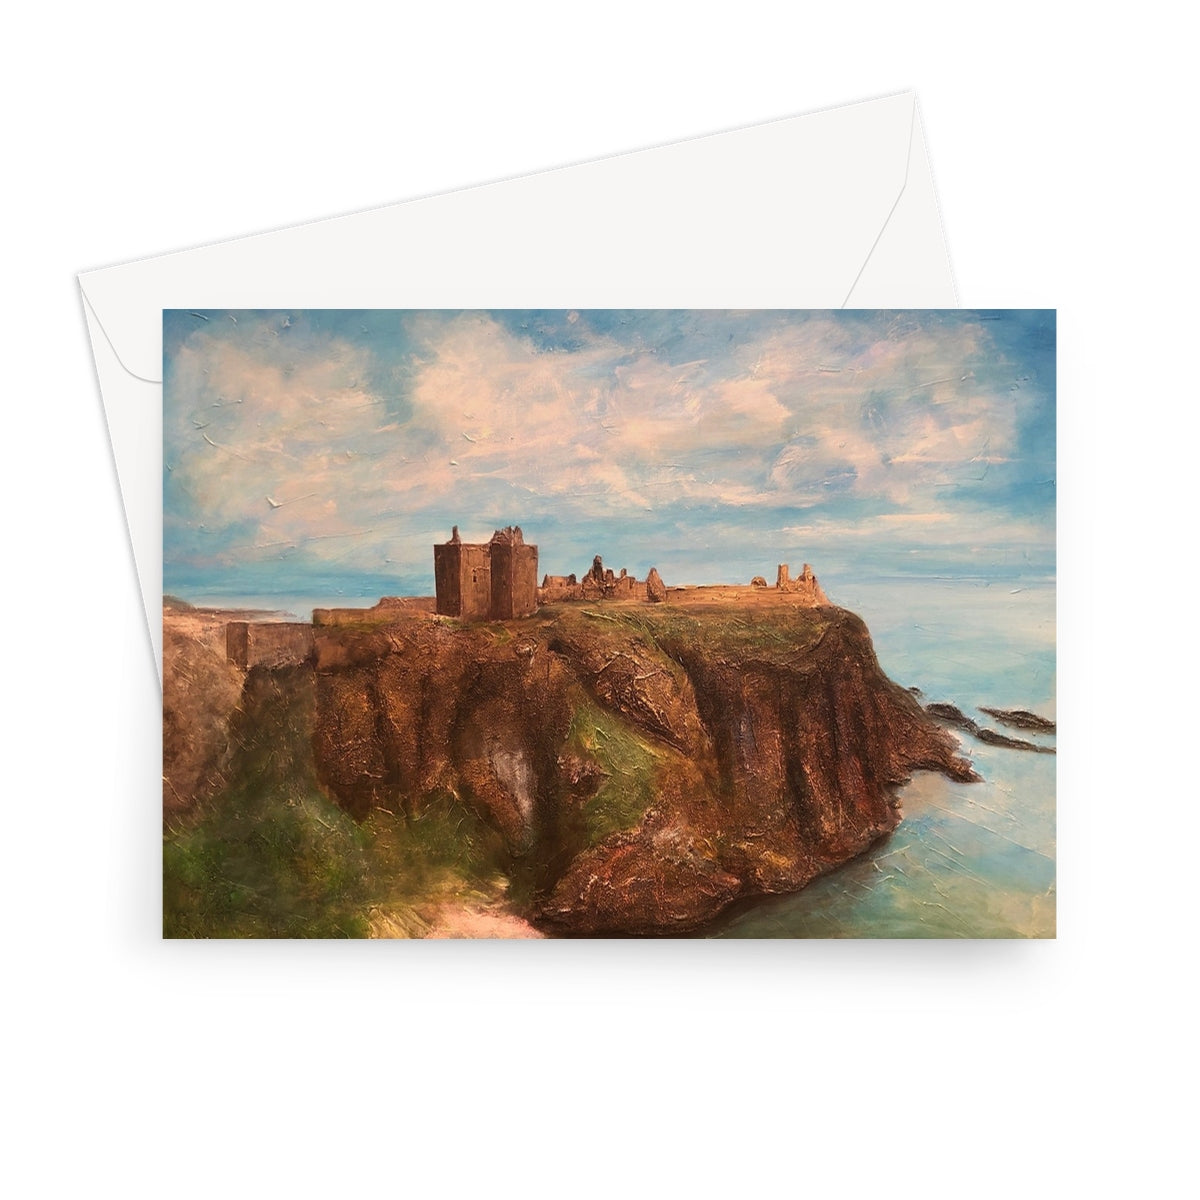 Dunnottar Castle Art Gifts Greeting Card-Stationery-Prodigi-7"x5"-10 Cards-Paintings, Prints, Homeware, Art Gifts From Scotland By Scottish Artist Kevin Hunter